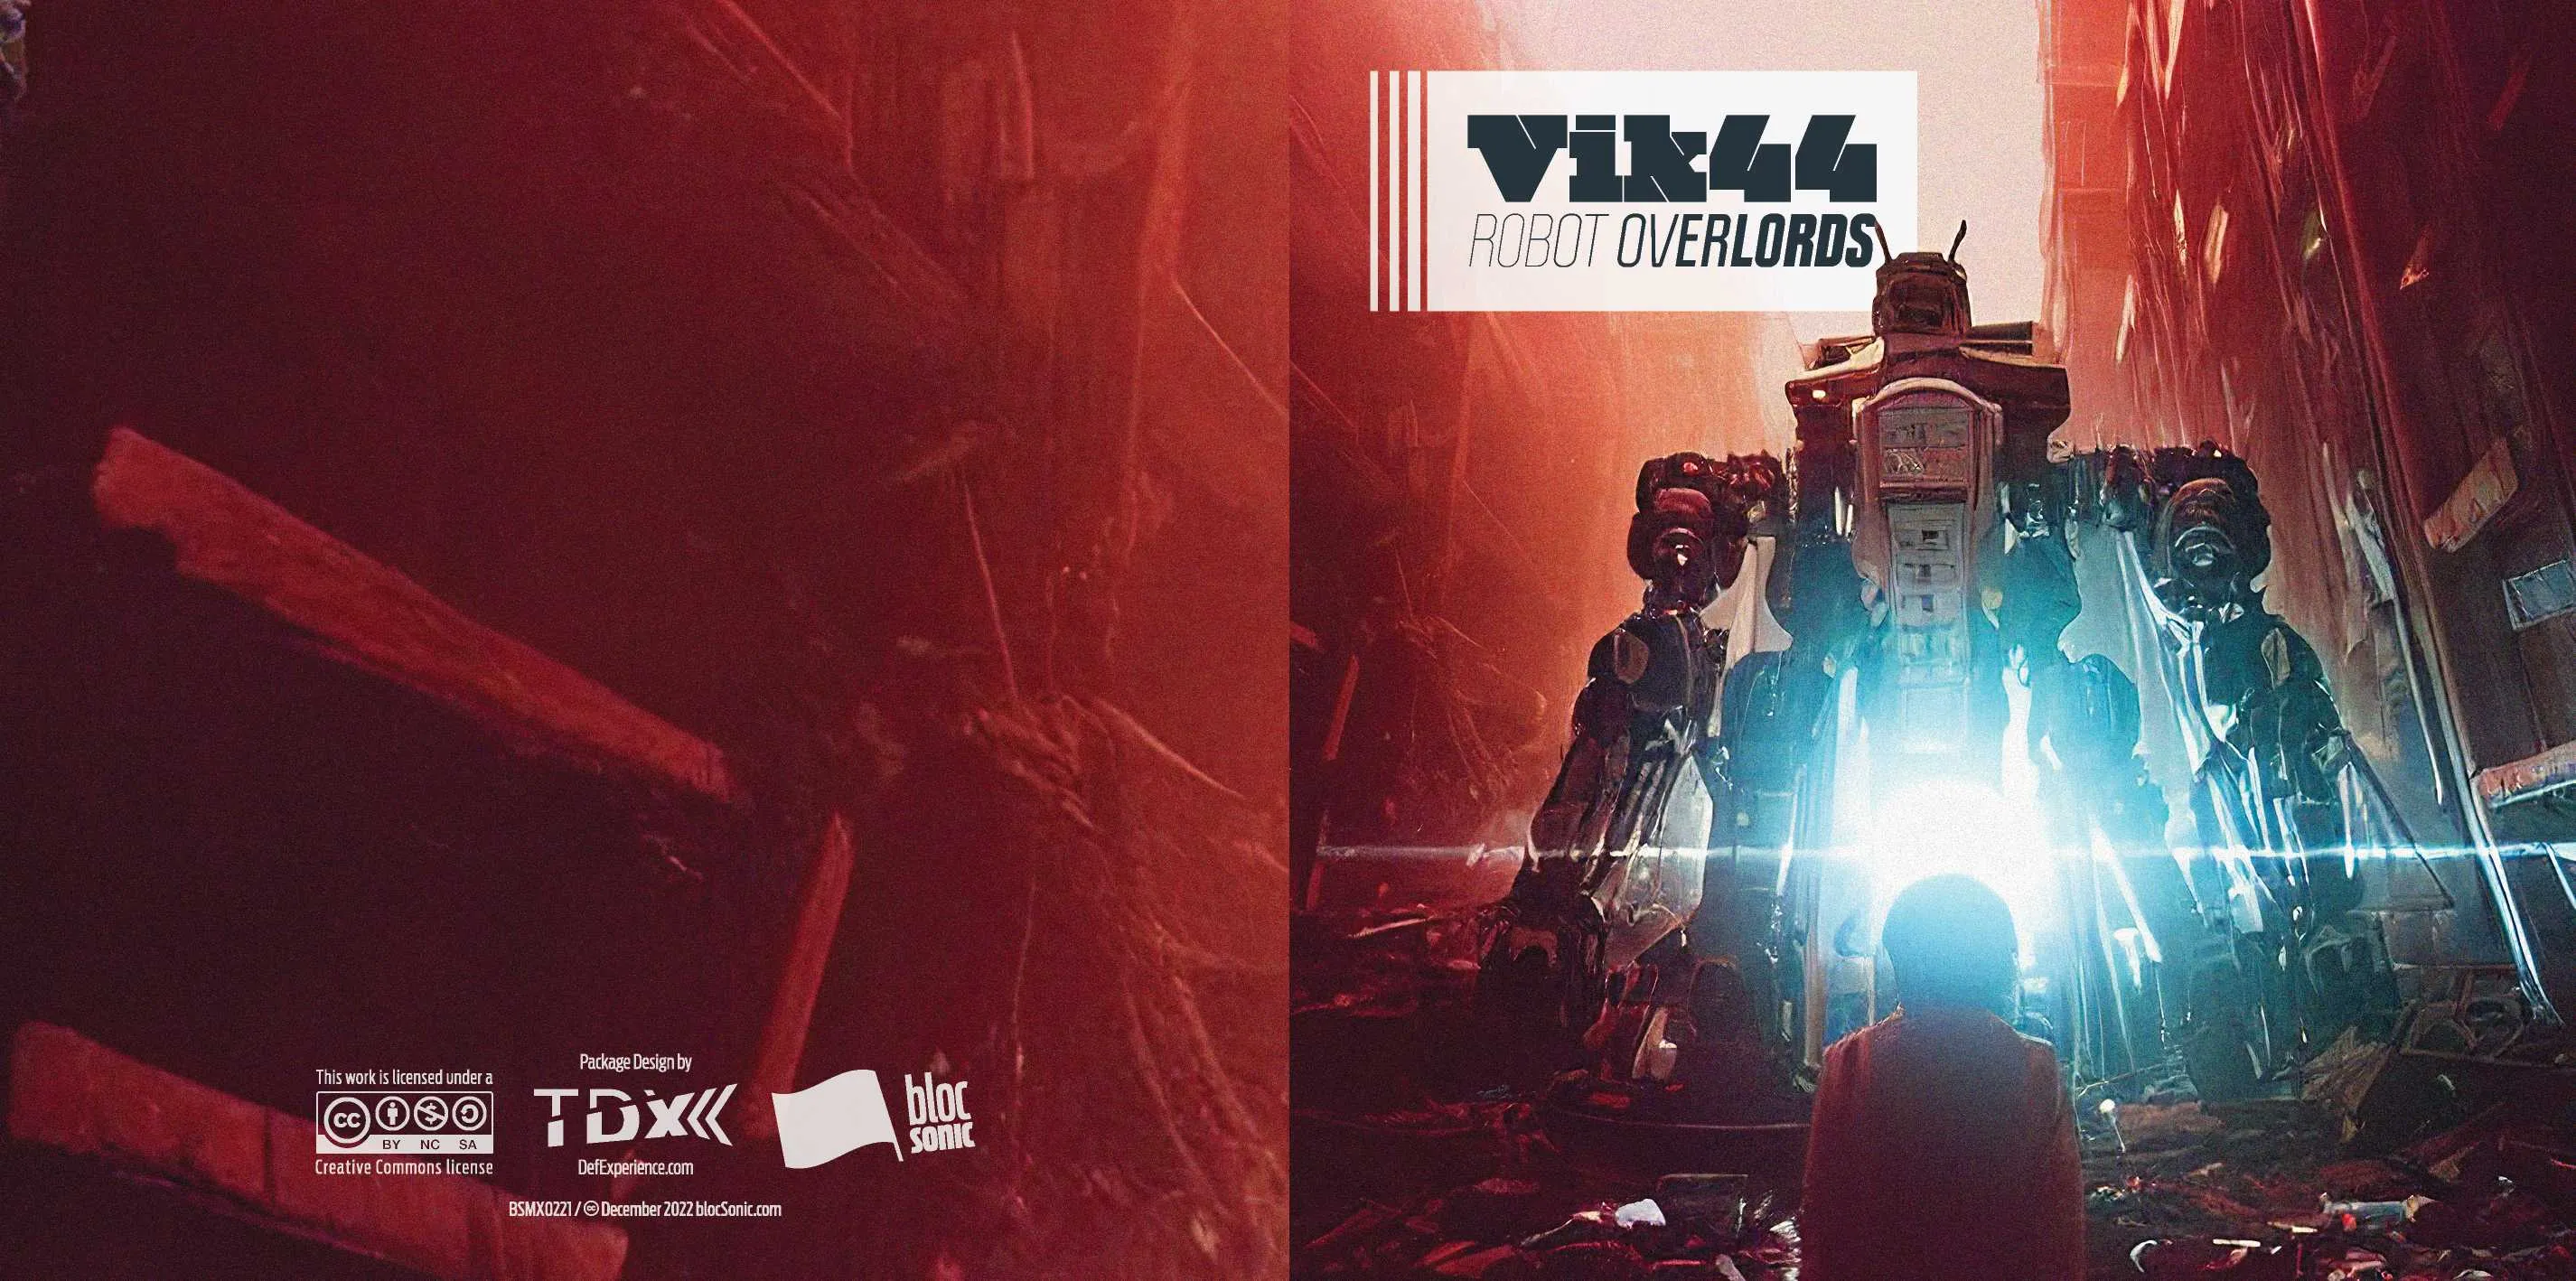 Album insert for “Robot Overlords” by Vik44